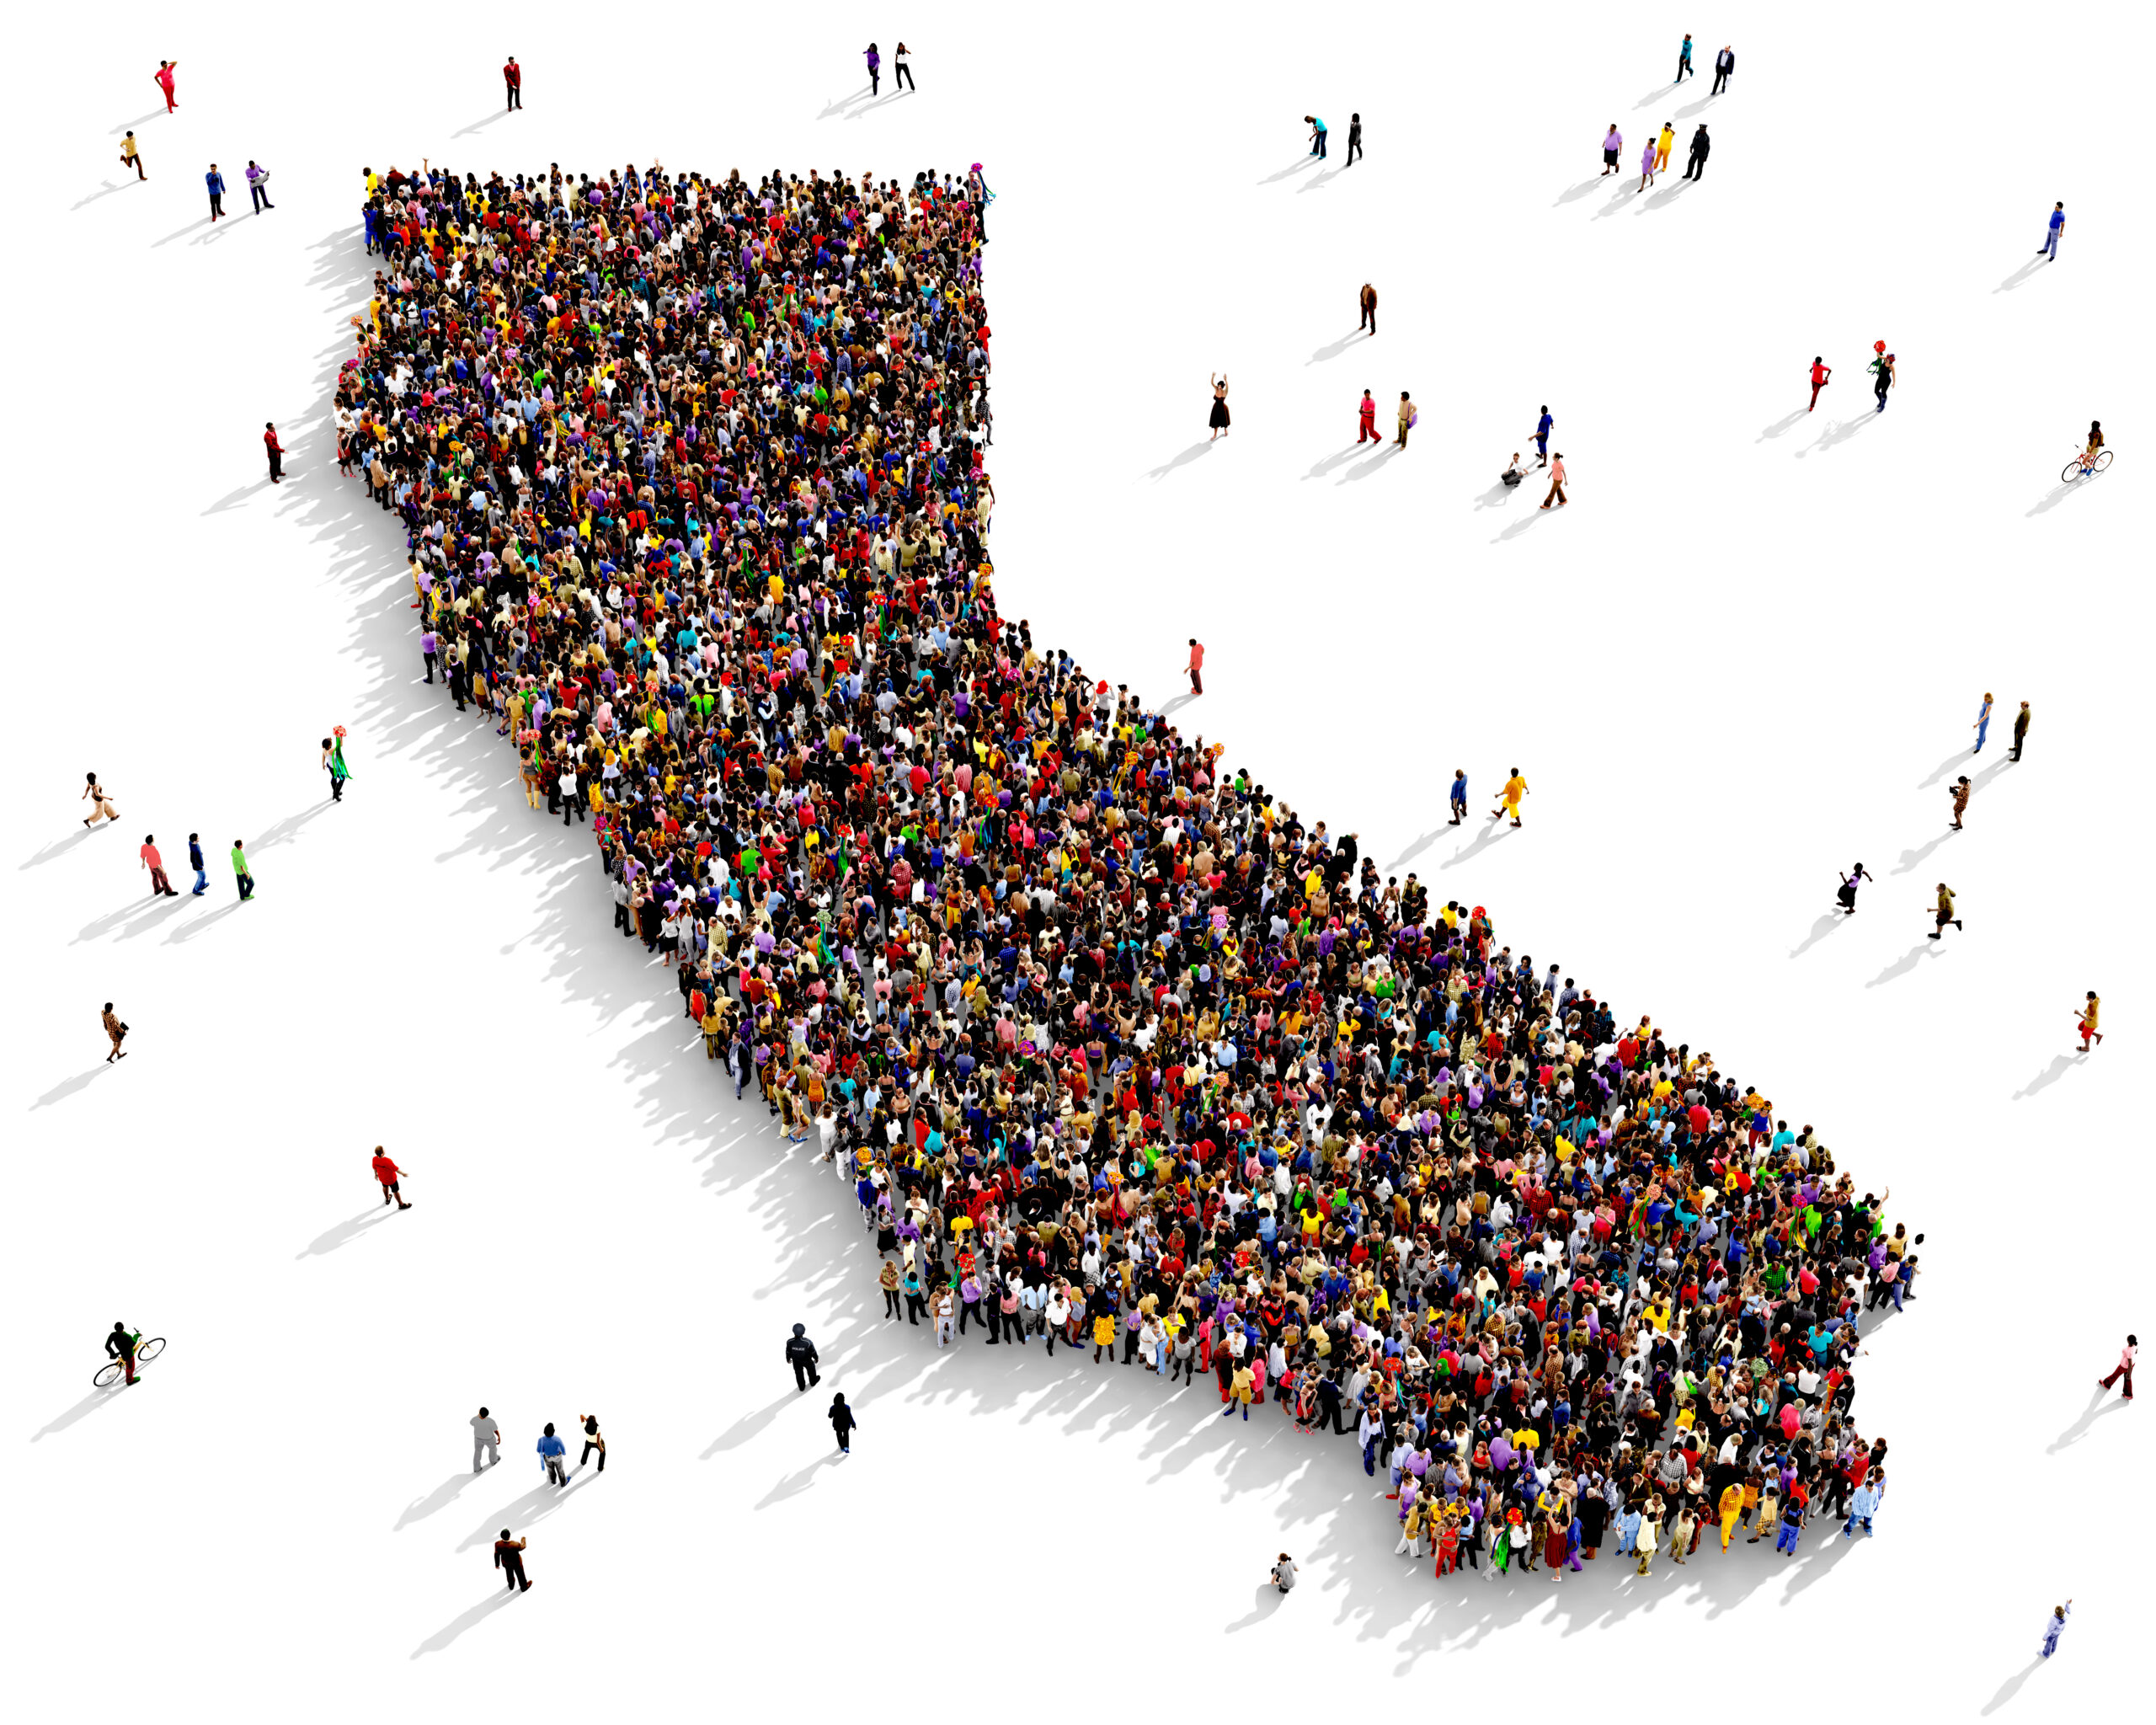 photo of California made of people